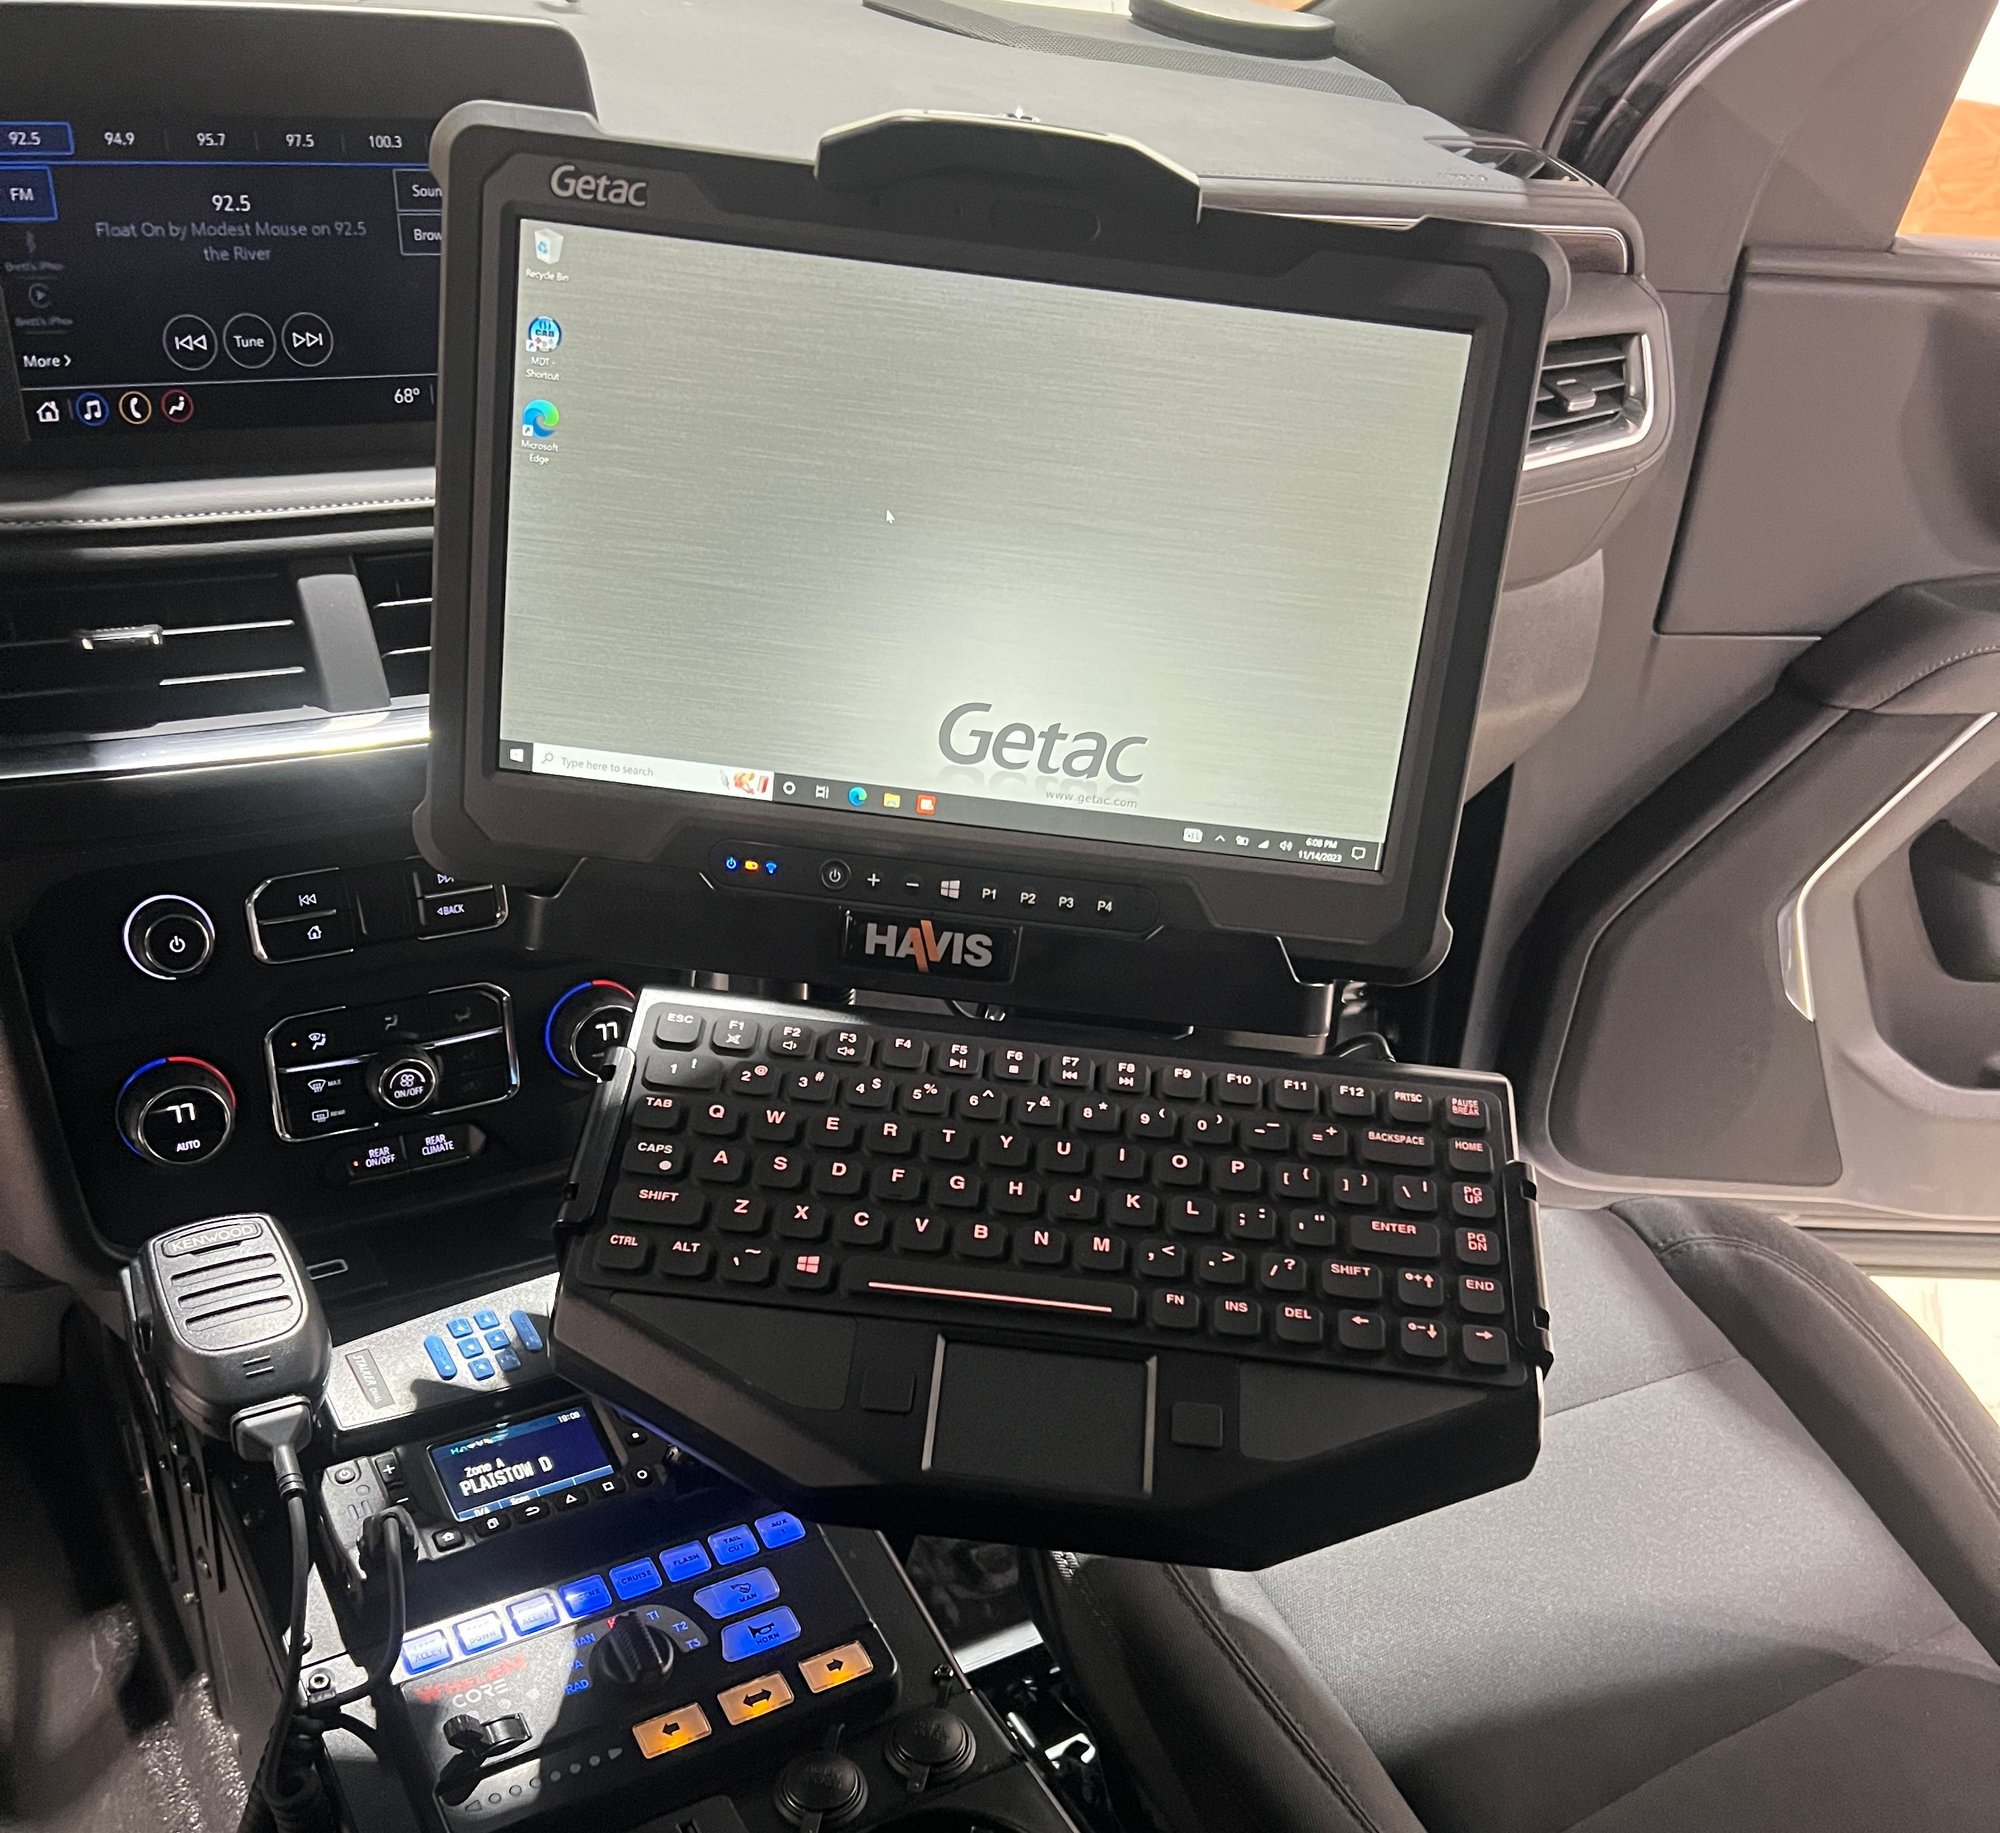 laptop in console area of police vehicle